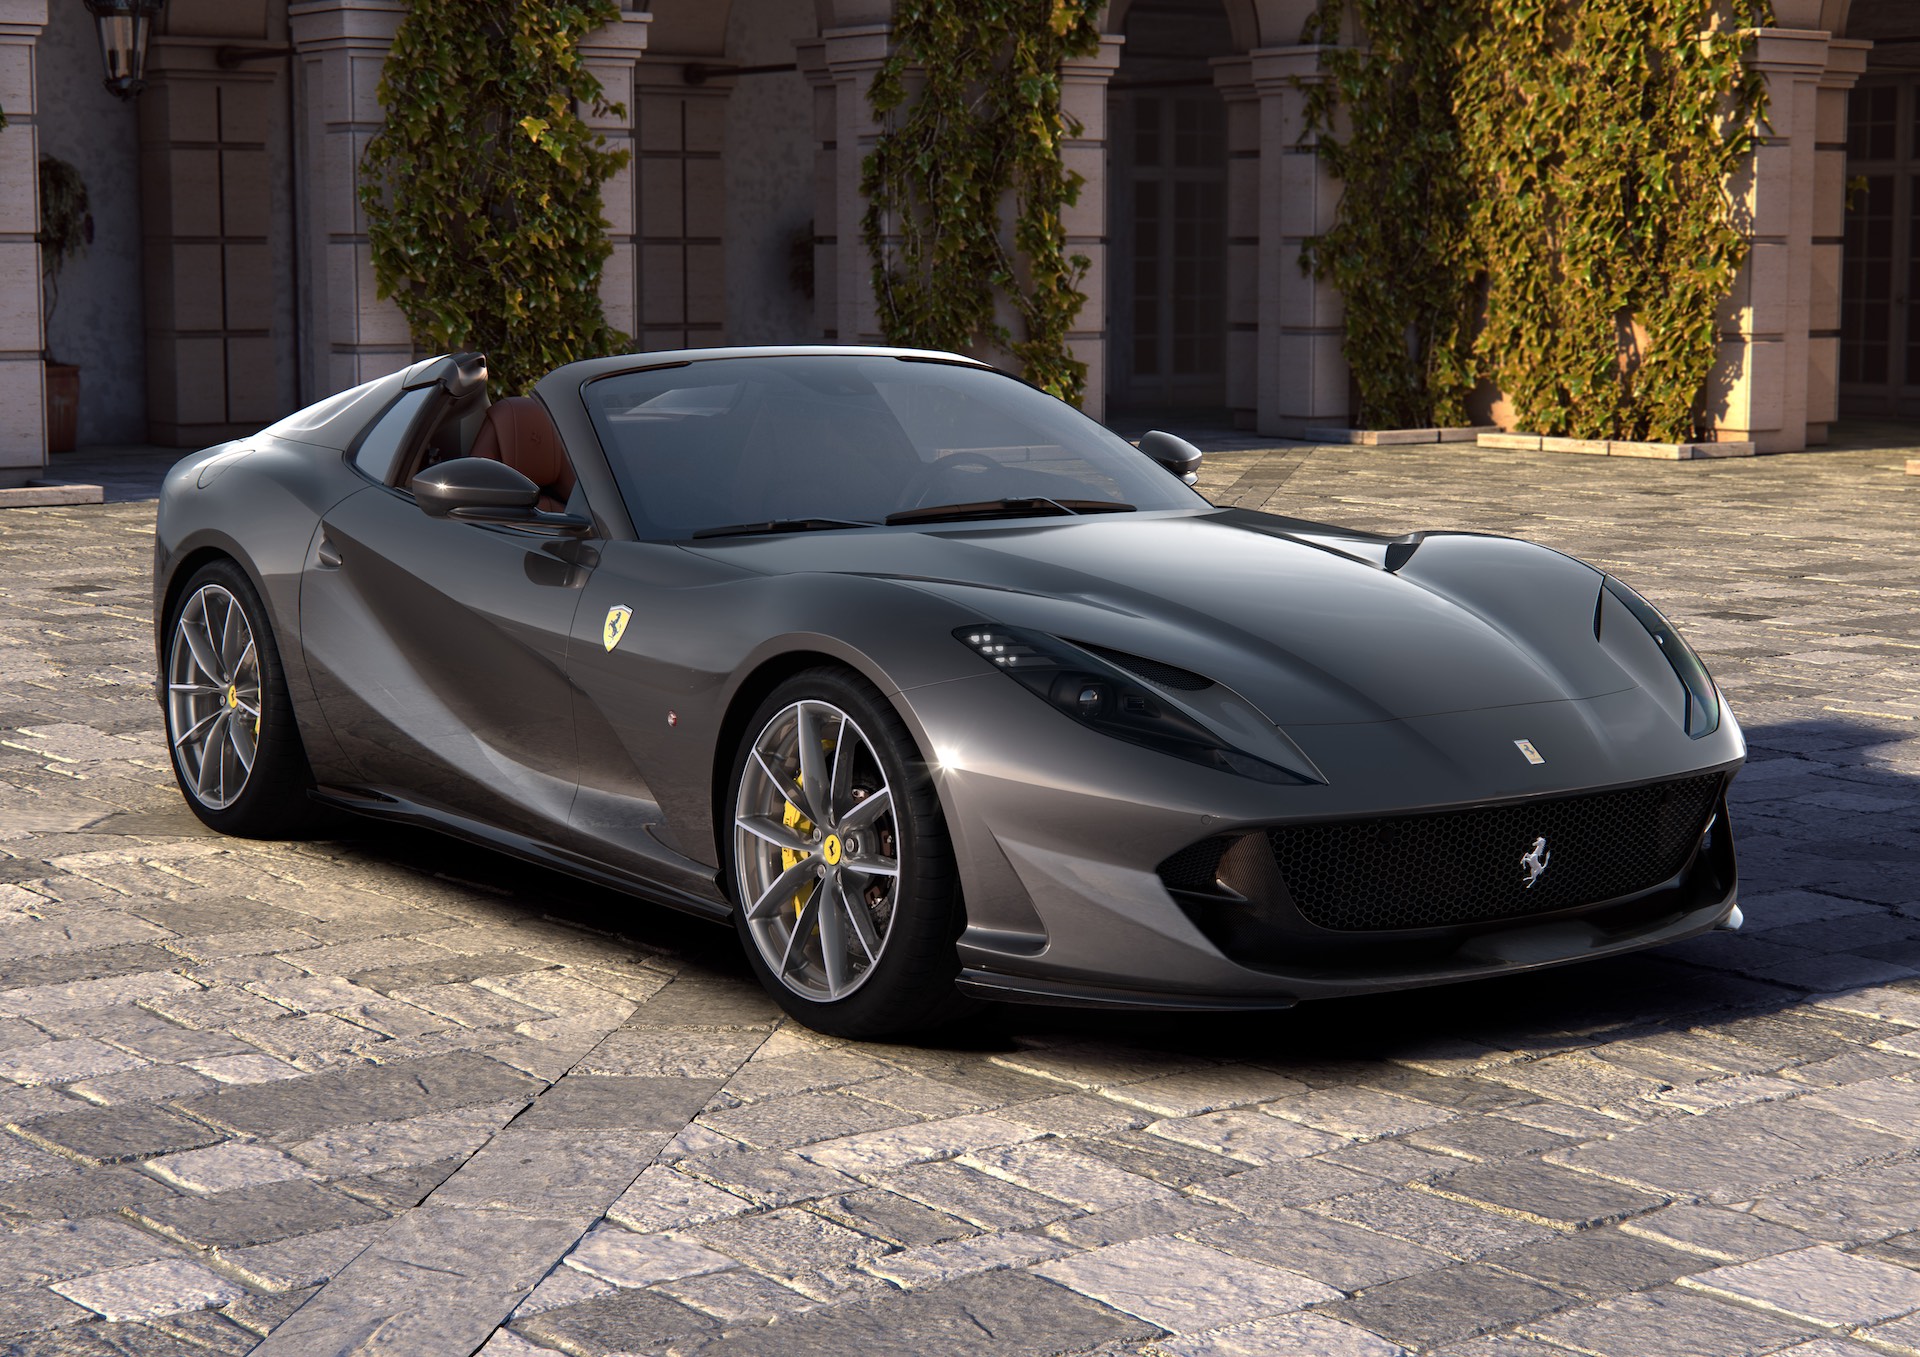 Ferrari V12 Spider Returns 50 Years Later With Debut Of 812 GTS